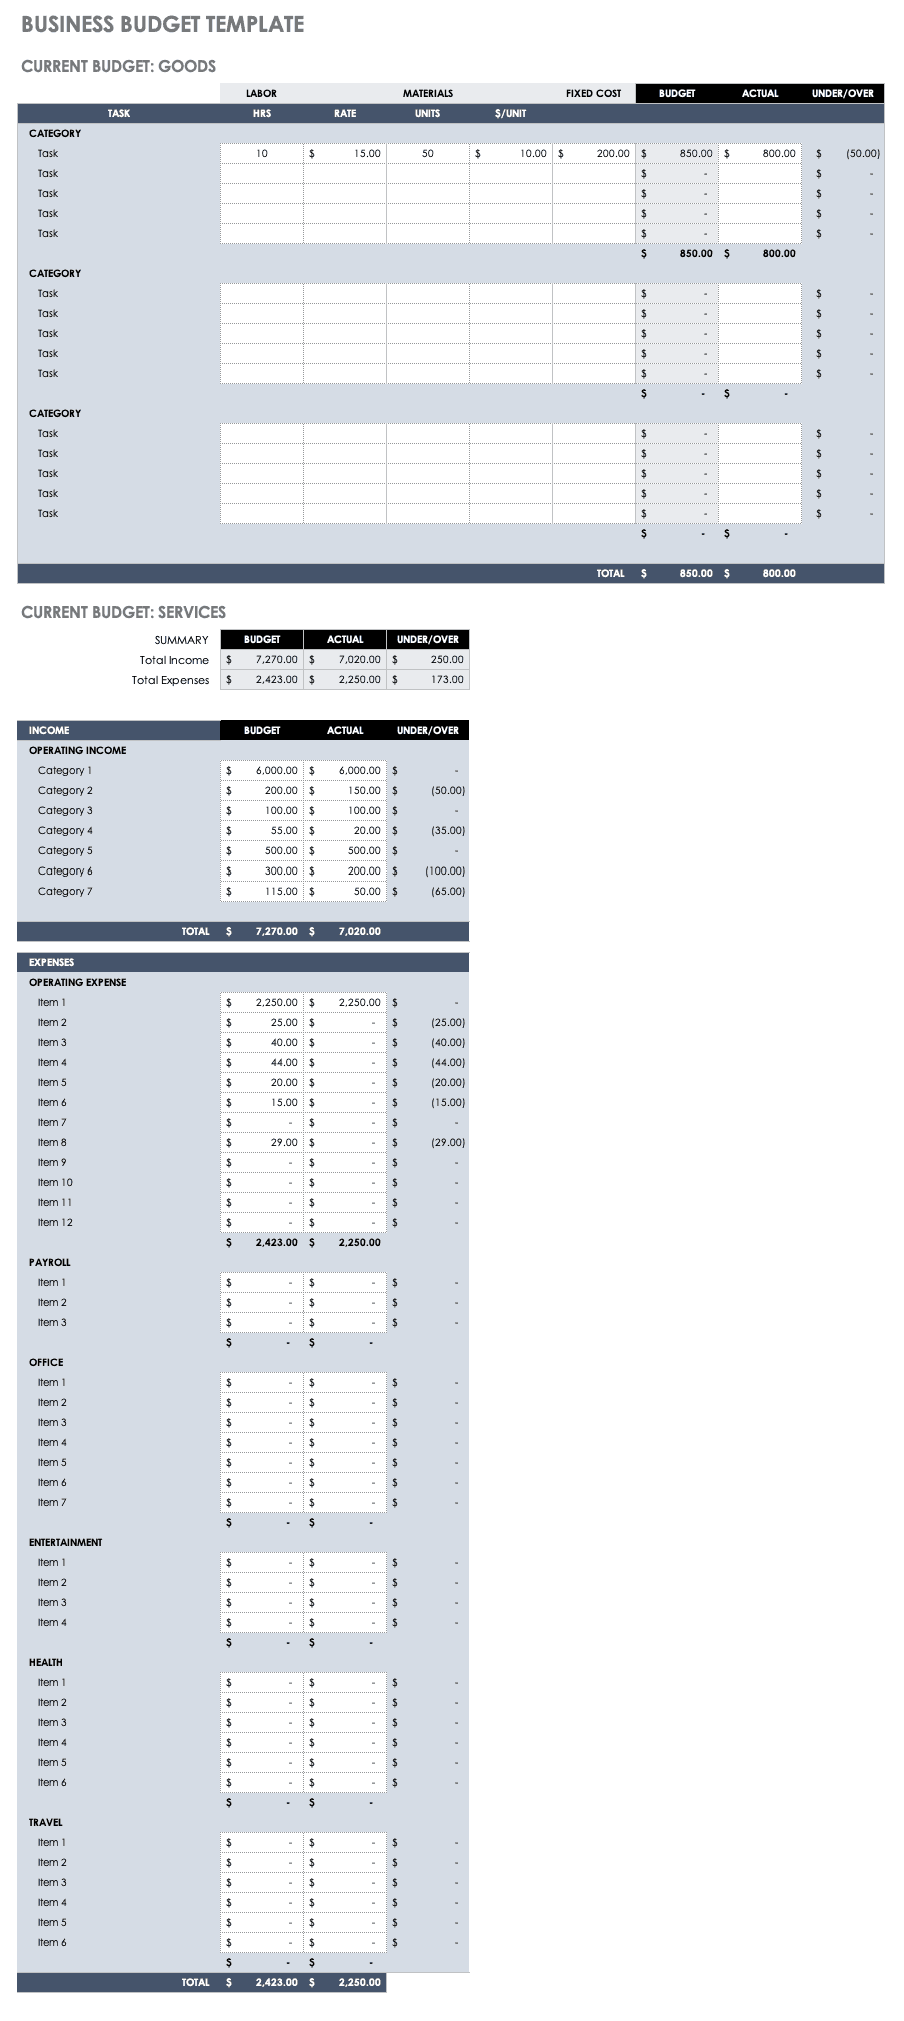 Business Budget Tracking Template